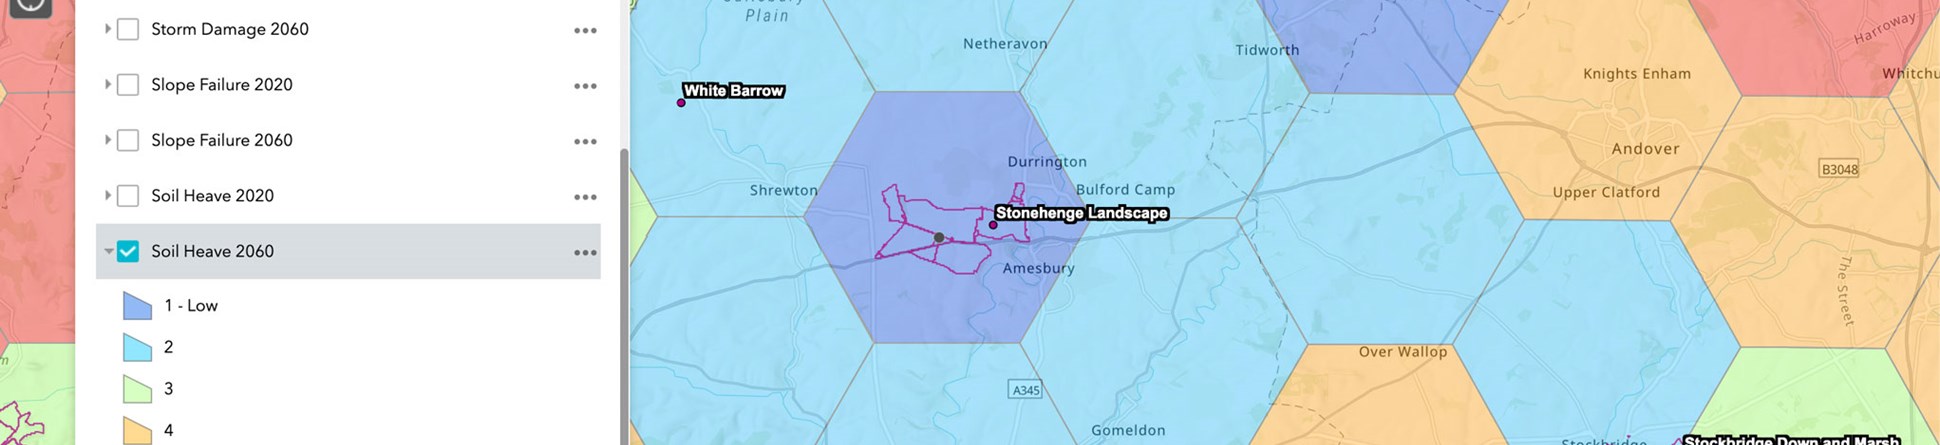 A screenshot of a climate hazard mapping tool showing risks attributed to West Amesbury, Wiltshire, against a background of hexagons. An insert shows the position of area mapped  on a map of southern England.